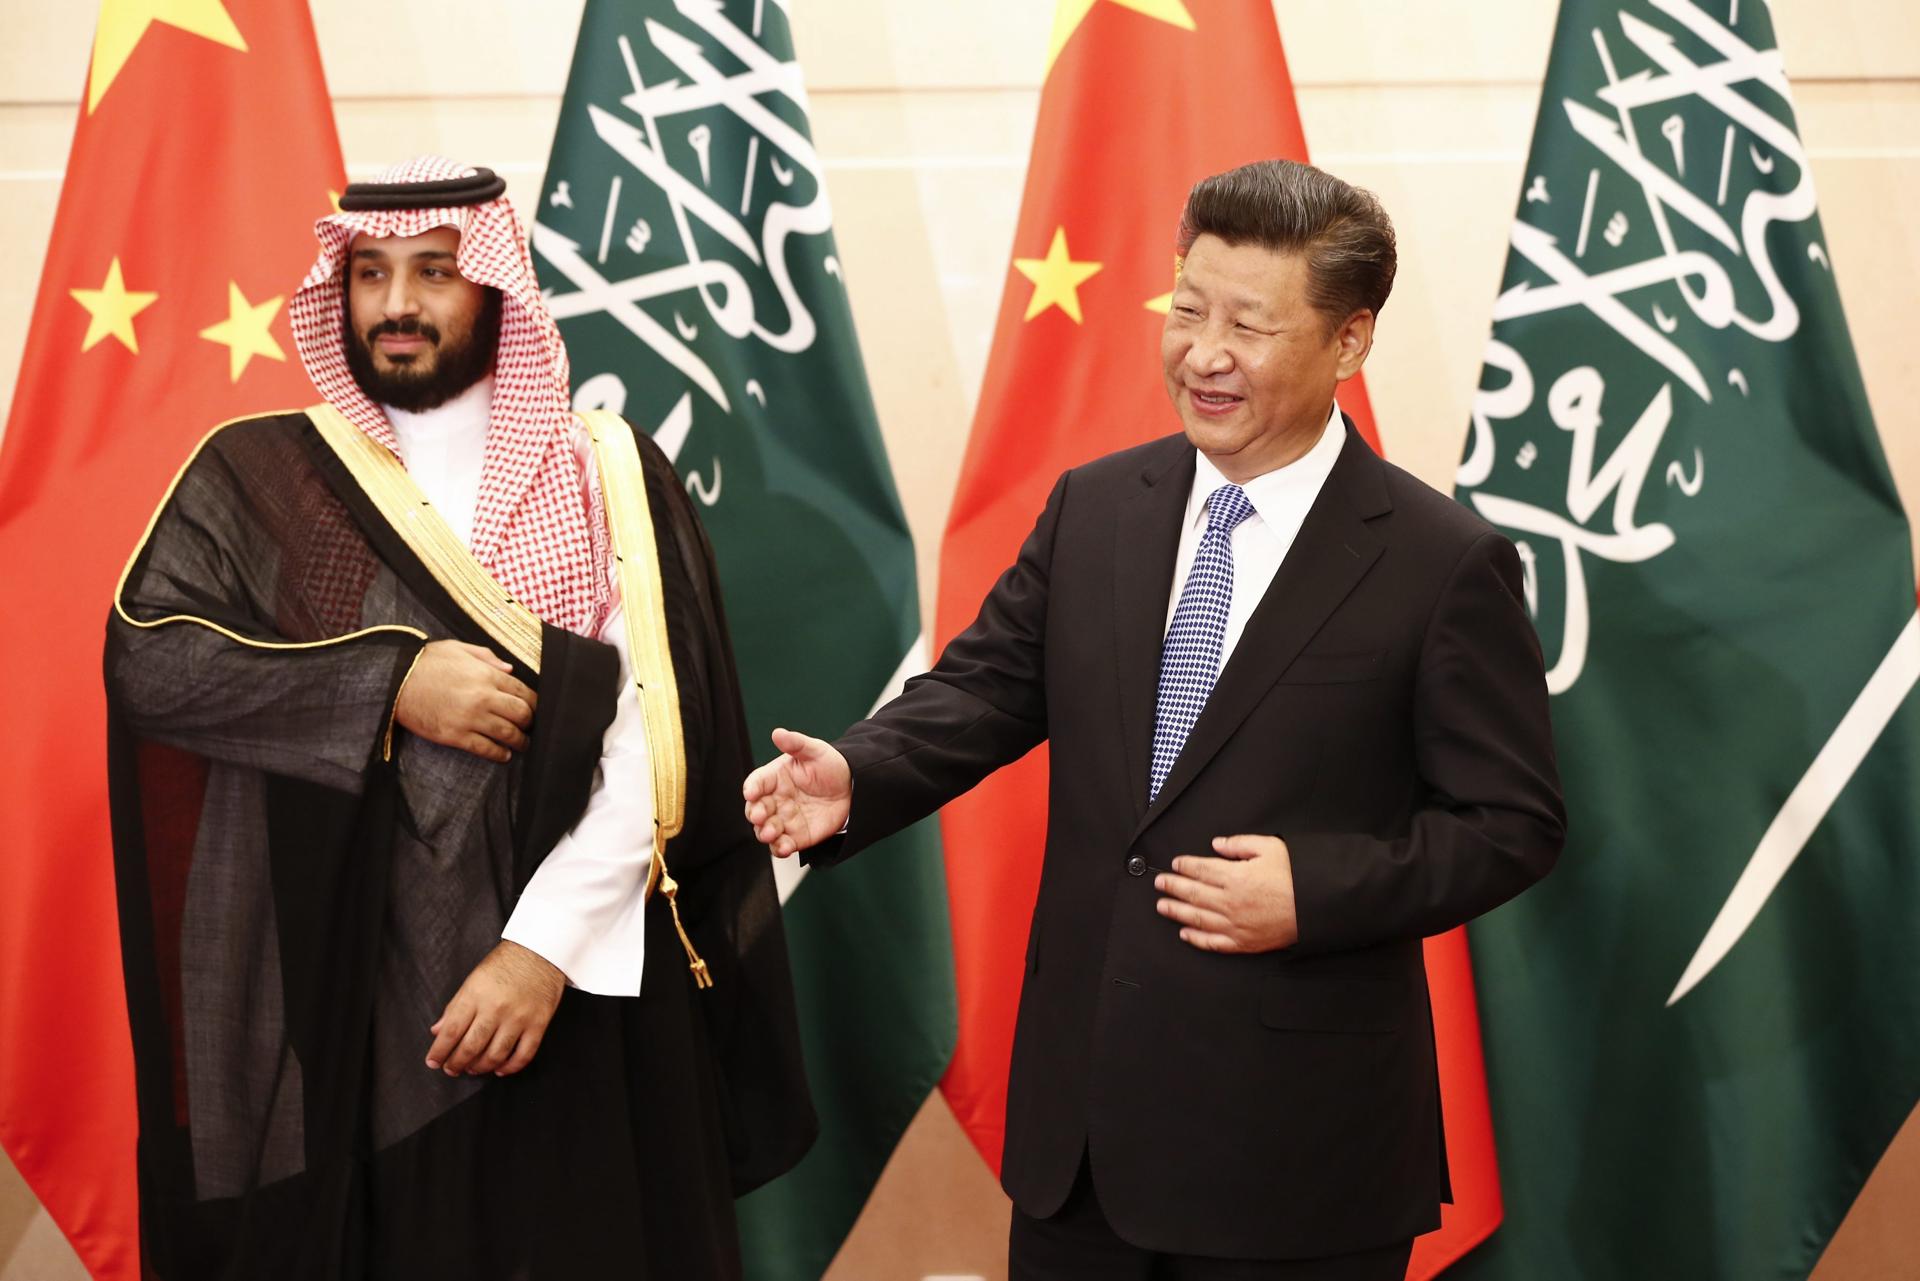 Chinese President Xi Jinping (R) welcomes Saudi Arabia's Crown Prince Mohammed bin Salman (L) during a meeting at the Diaoyutai State Guest Residence in Beijing, China, on August 31. 2016. EFE/Rolex Dela Pena/Pool/FILE